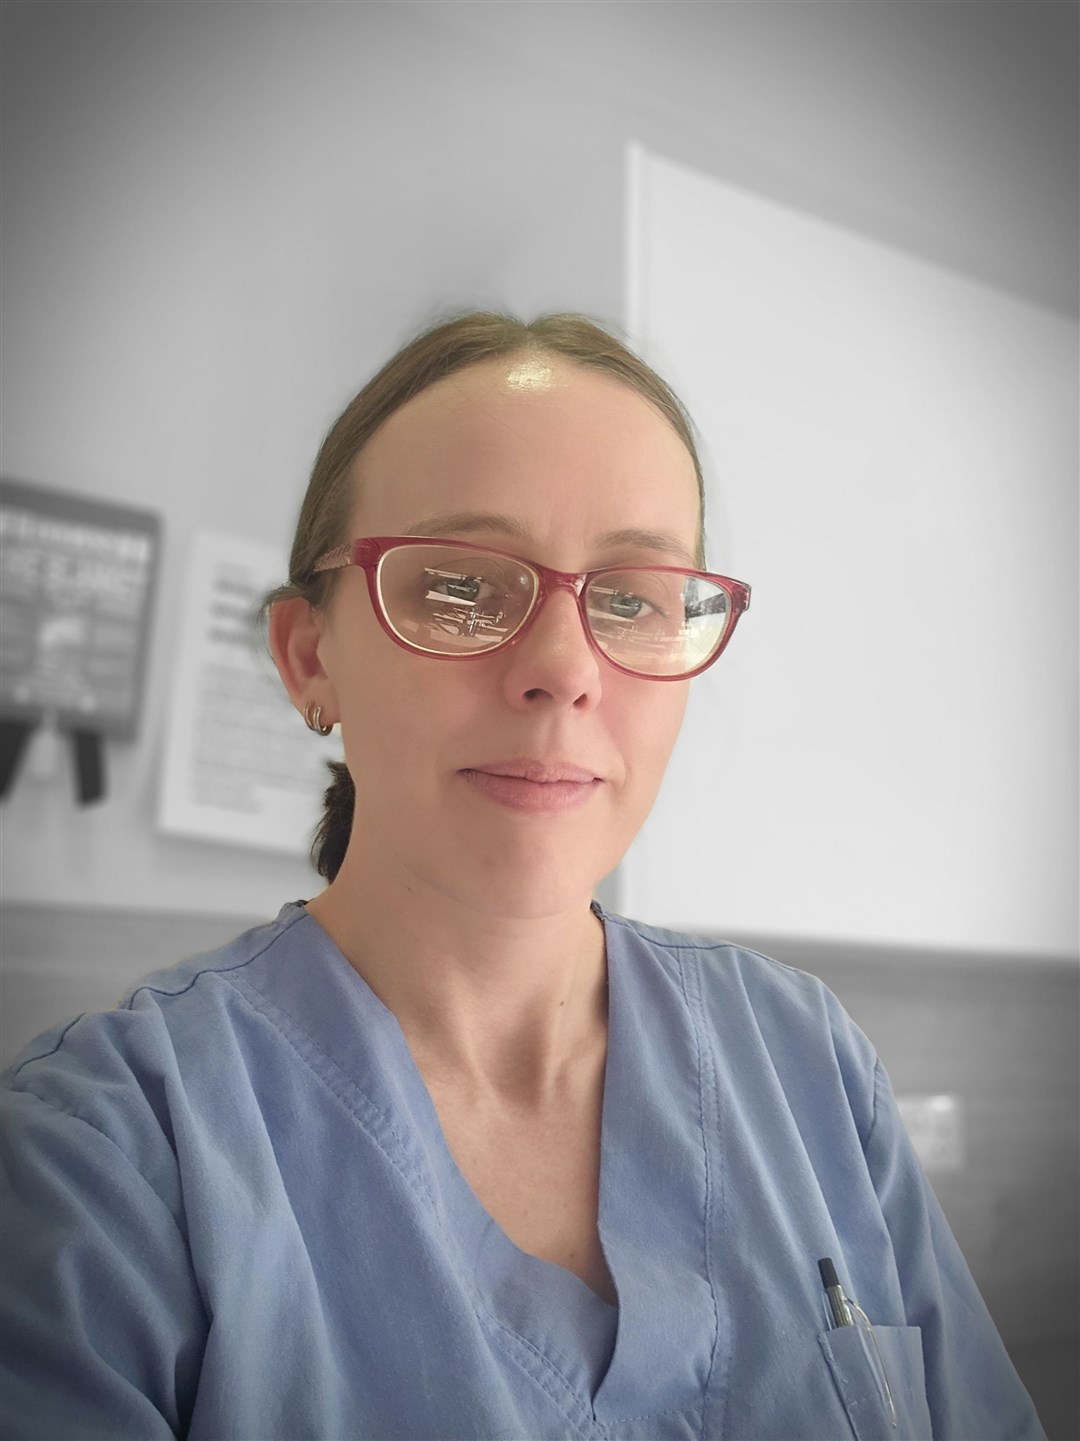 Kirsty MacLean: 'I am learning a great deal through my SVQ Level 2, but also benefit greatly through support and guidance from my colleagues which enables me to provide excellent quality care.'